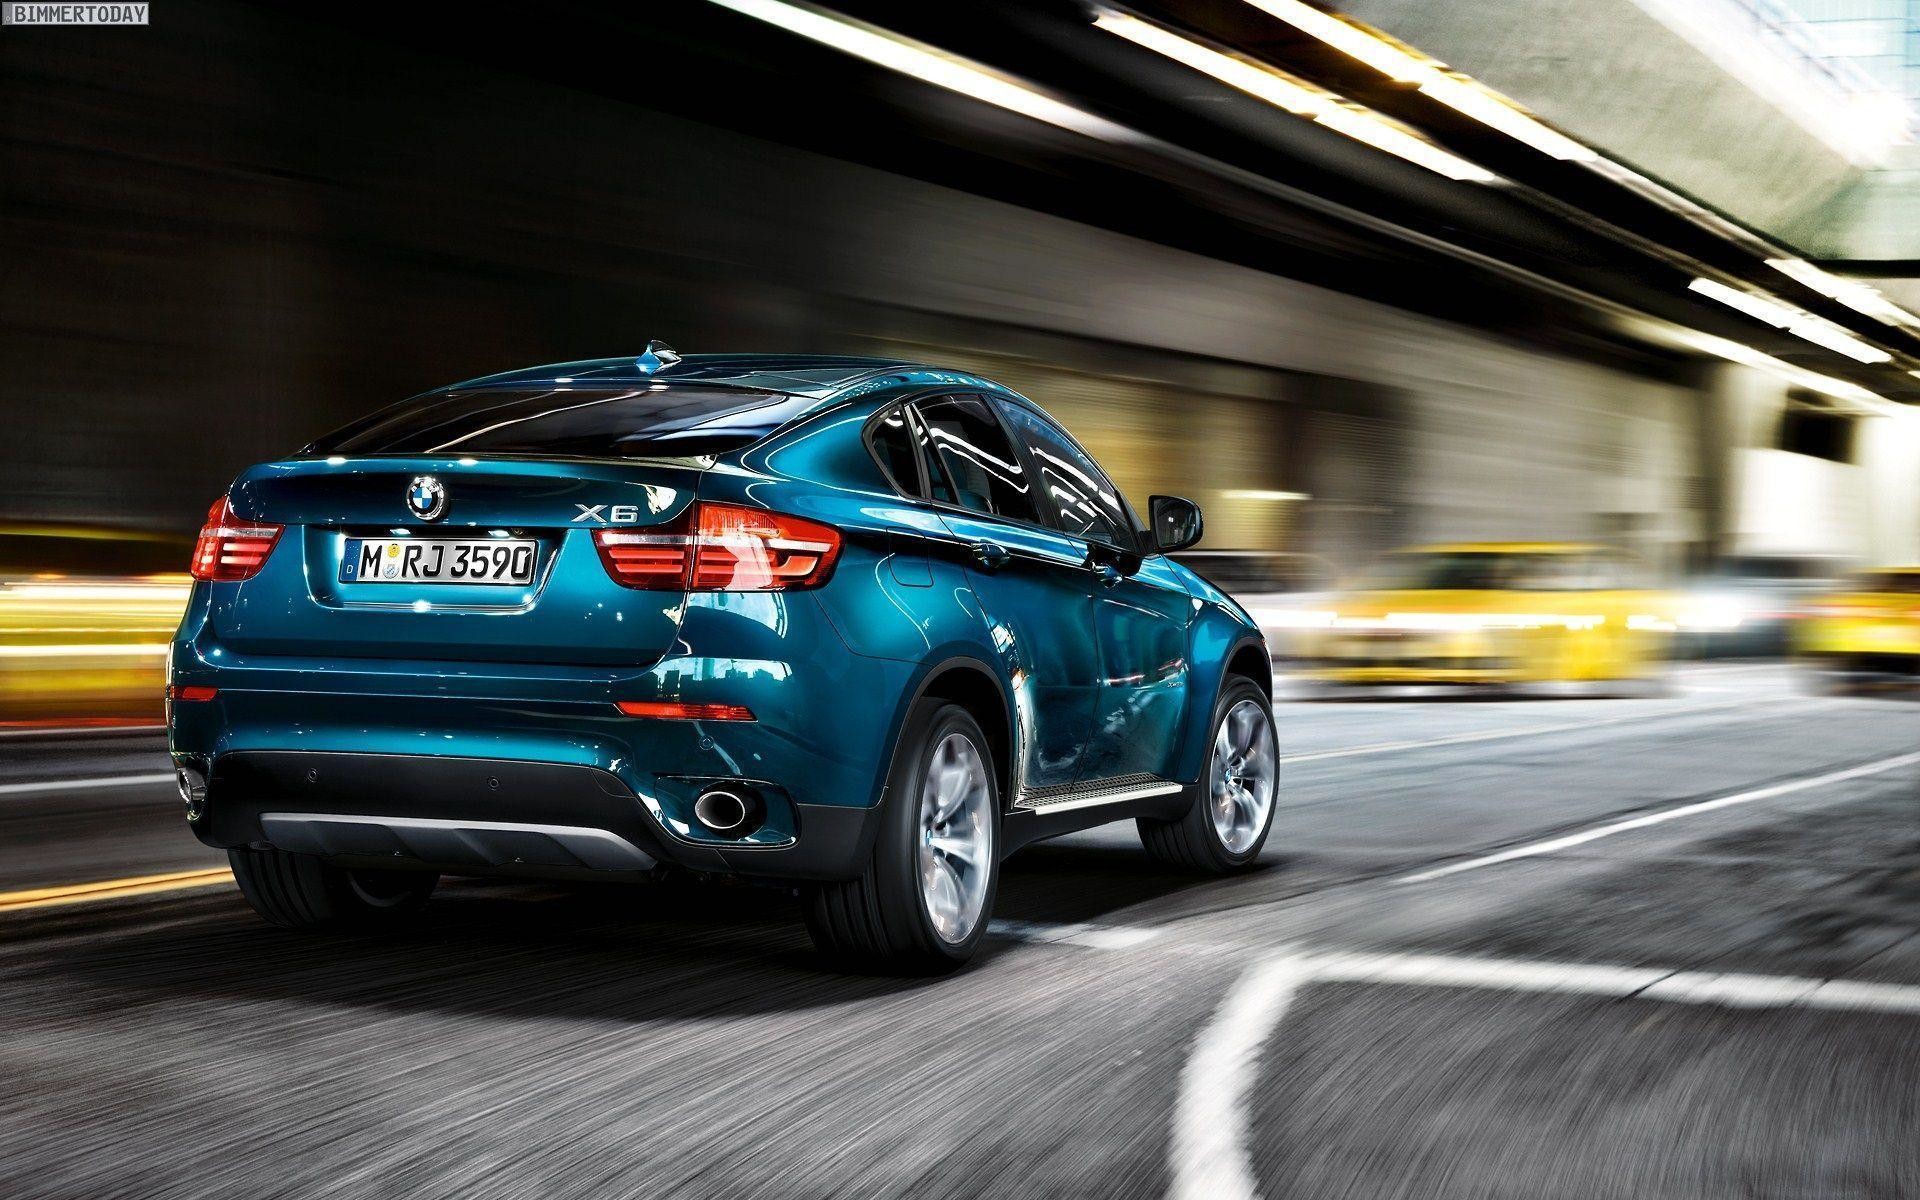 Amazing Bmw X6 Wallpaper Pictures